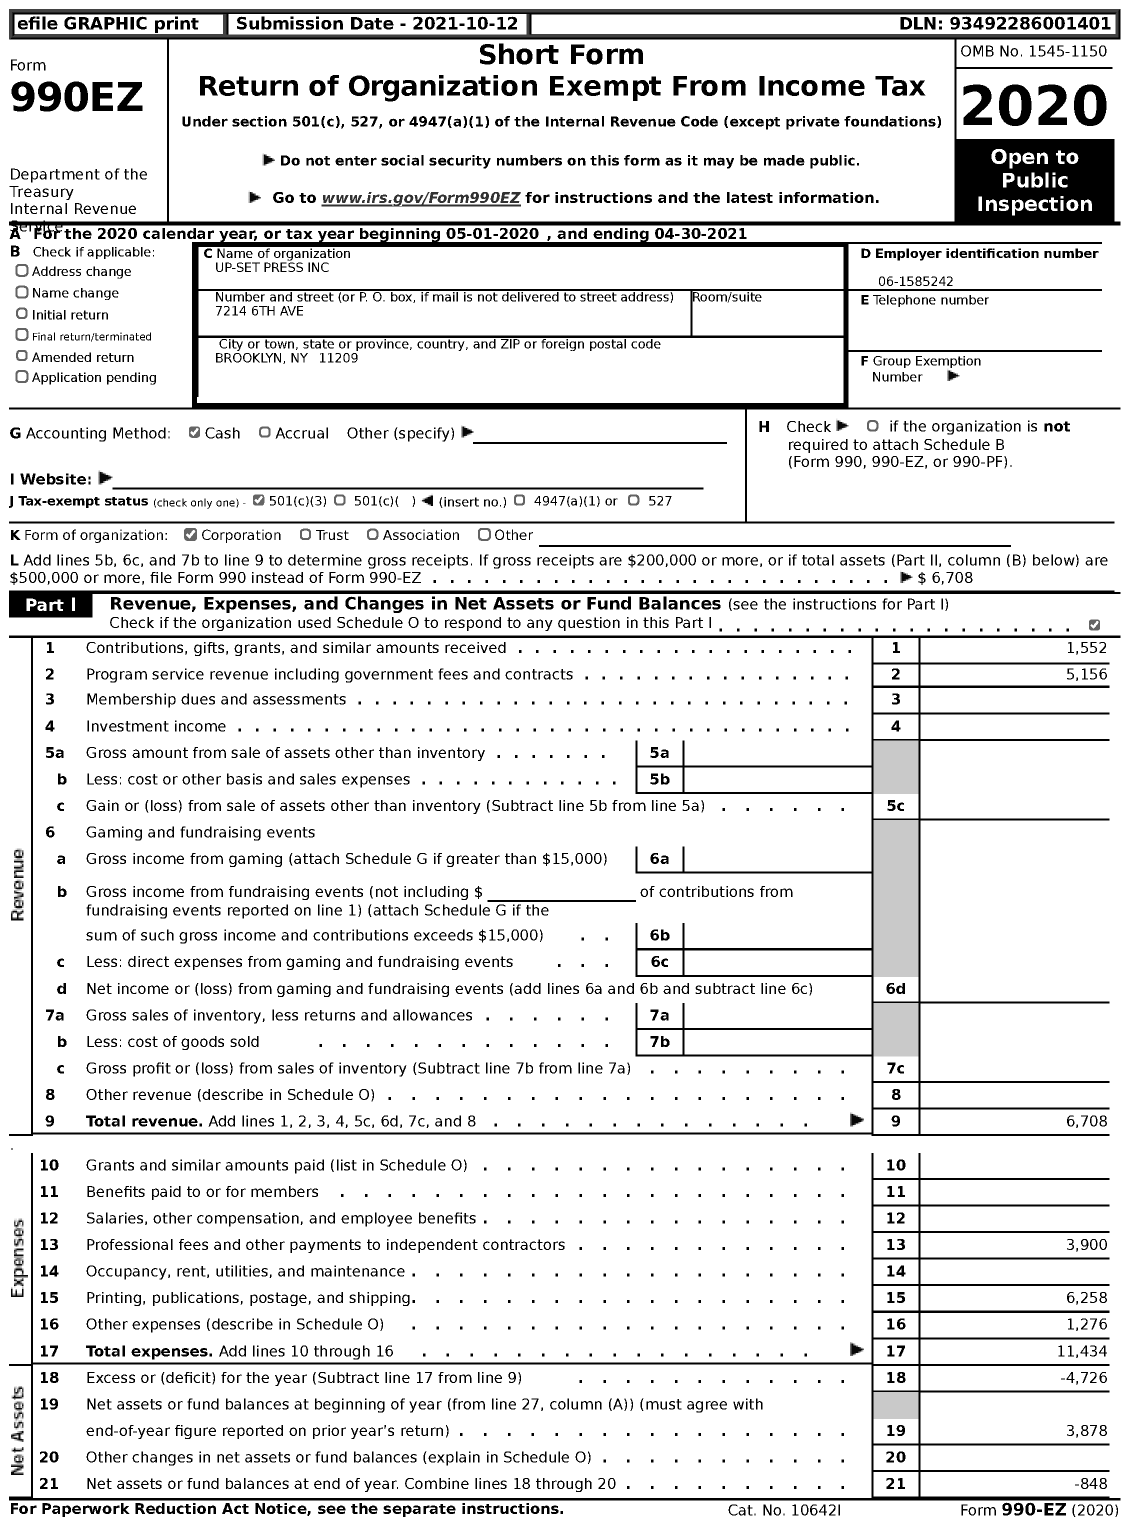 Image of first page of 2020 Form 990EZ for Up-Set Press